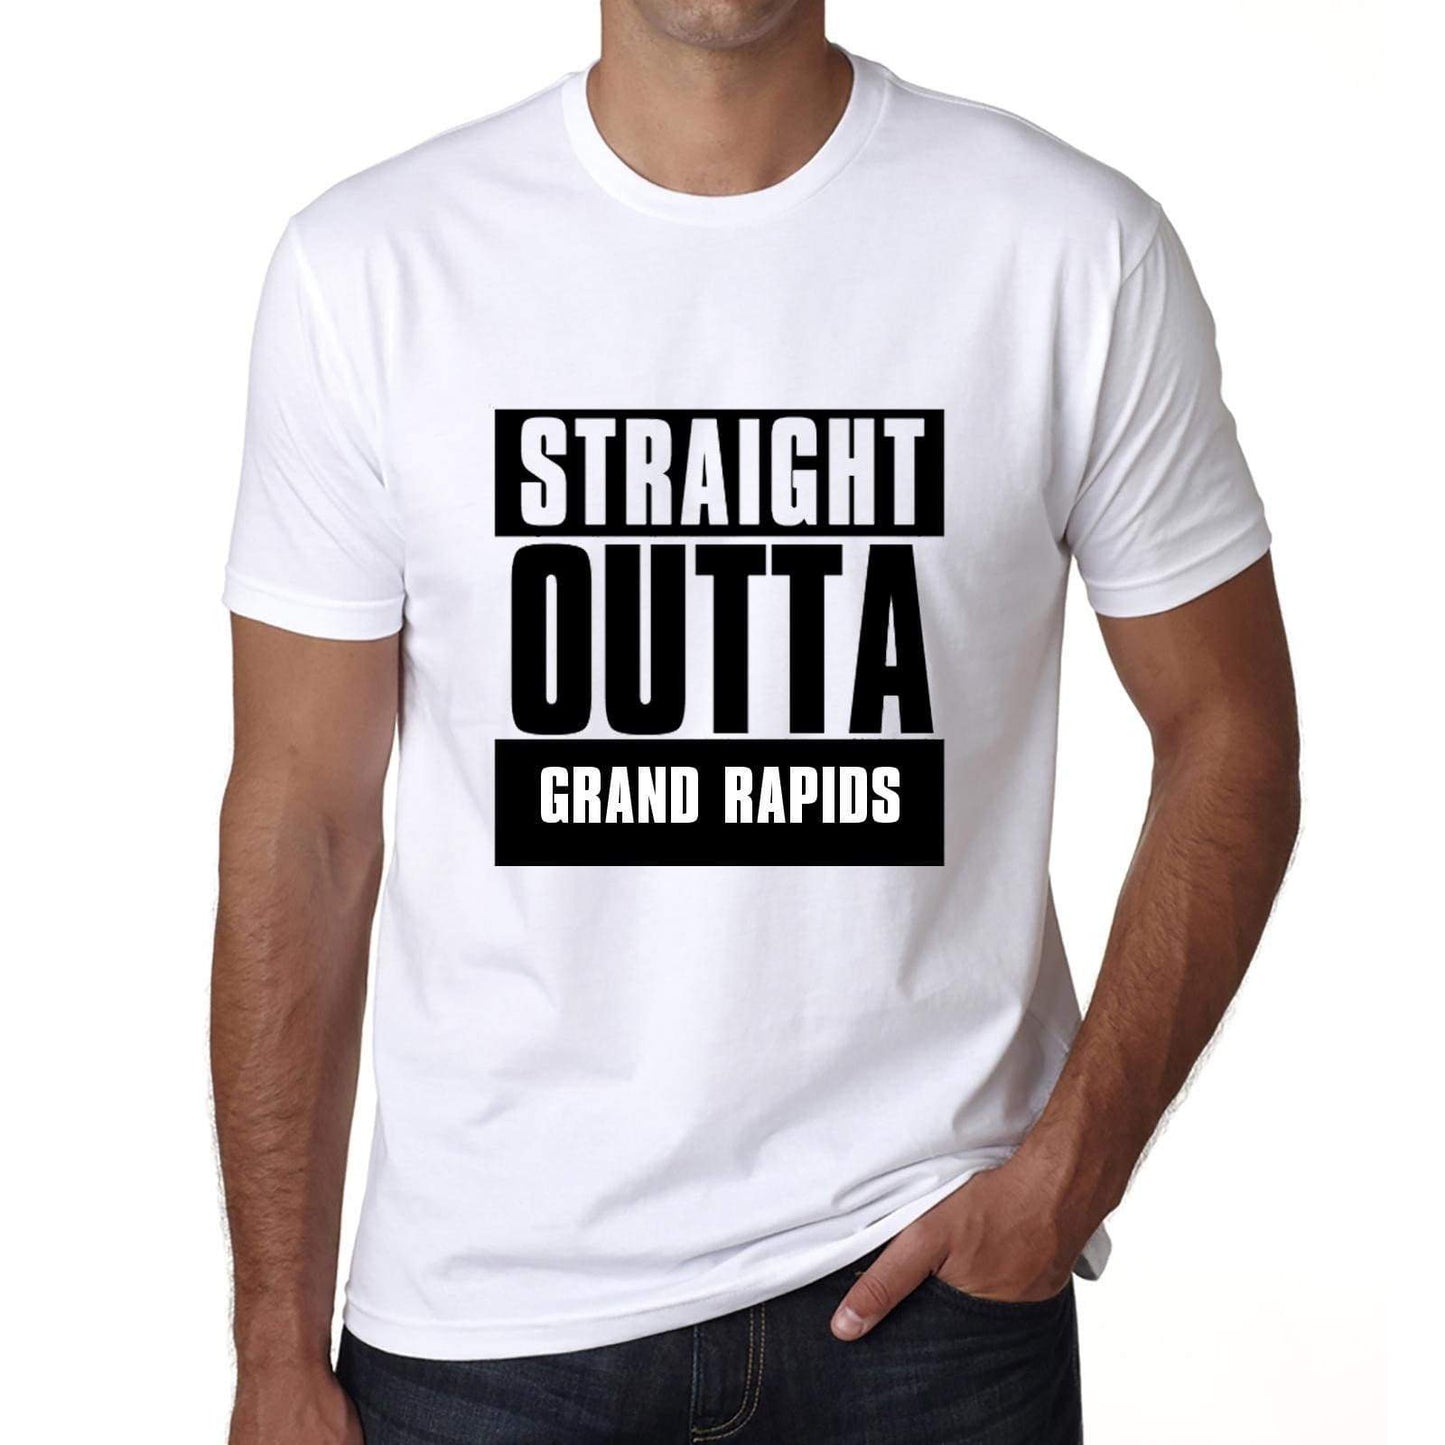 Straight Outta Grand Rapids Mens Short Sleeve Round Neck T-Shirt 00027 - White / S - Casual